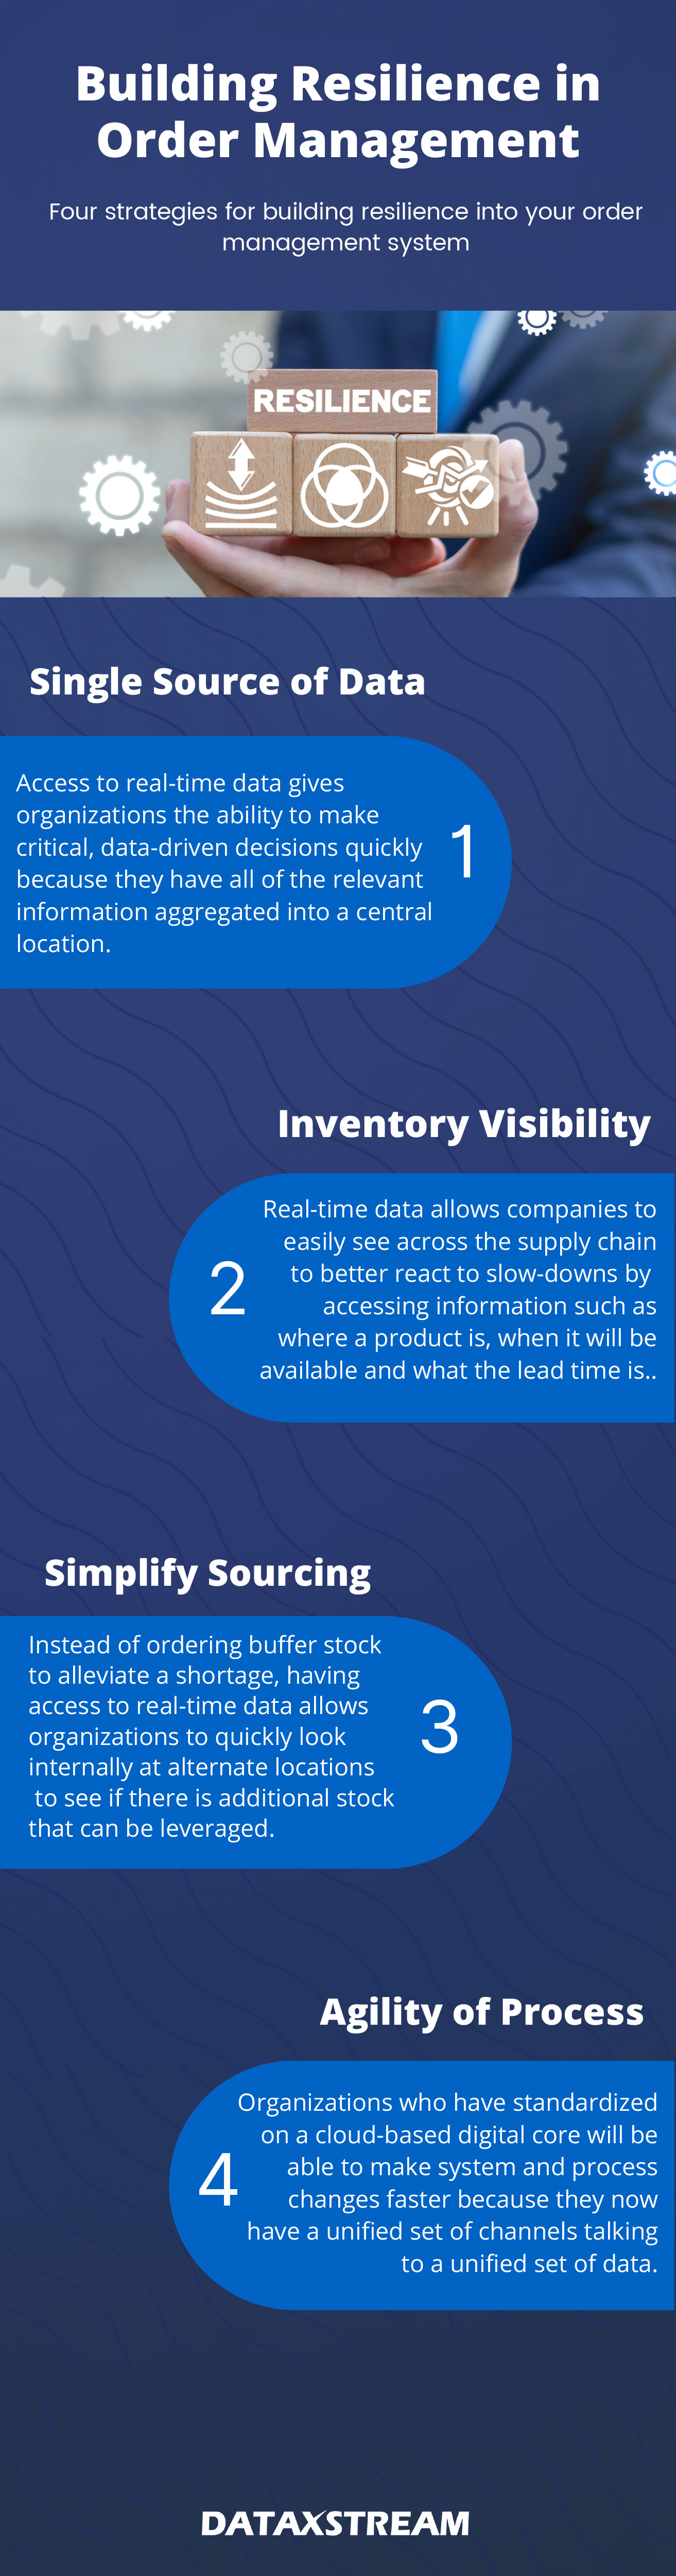 Building Resilience Into Sales Order Management Infographic, Industry Today